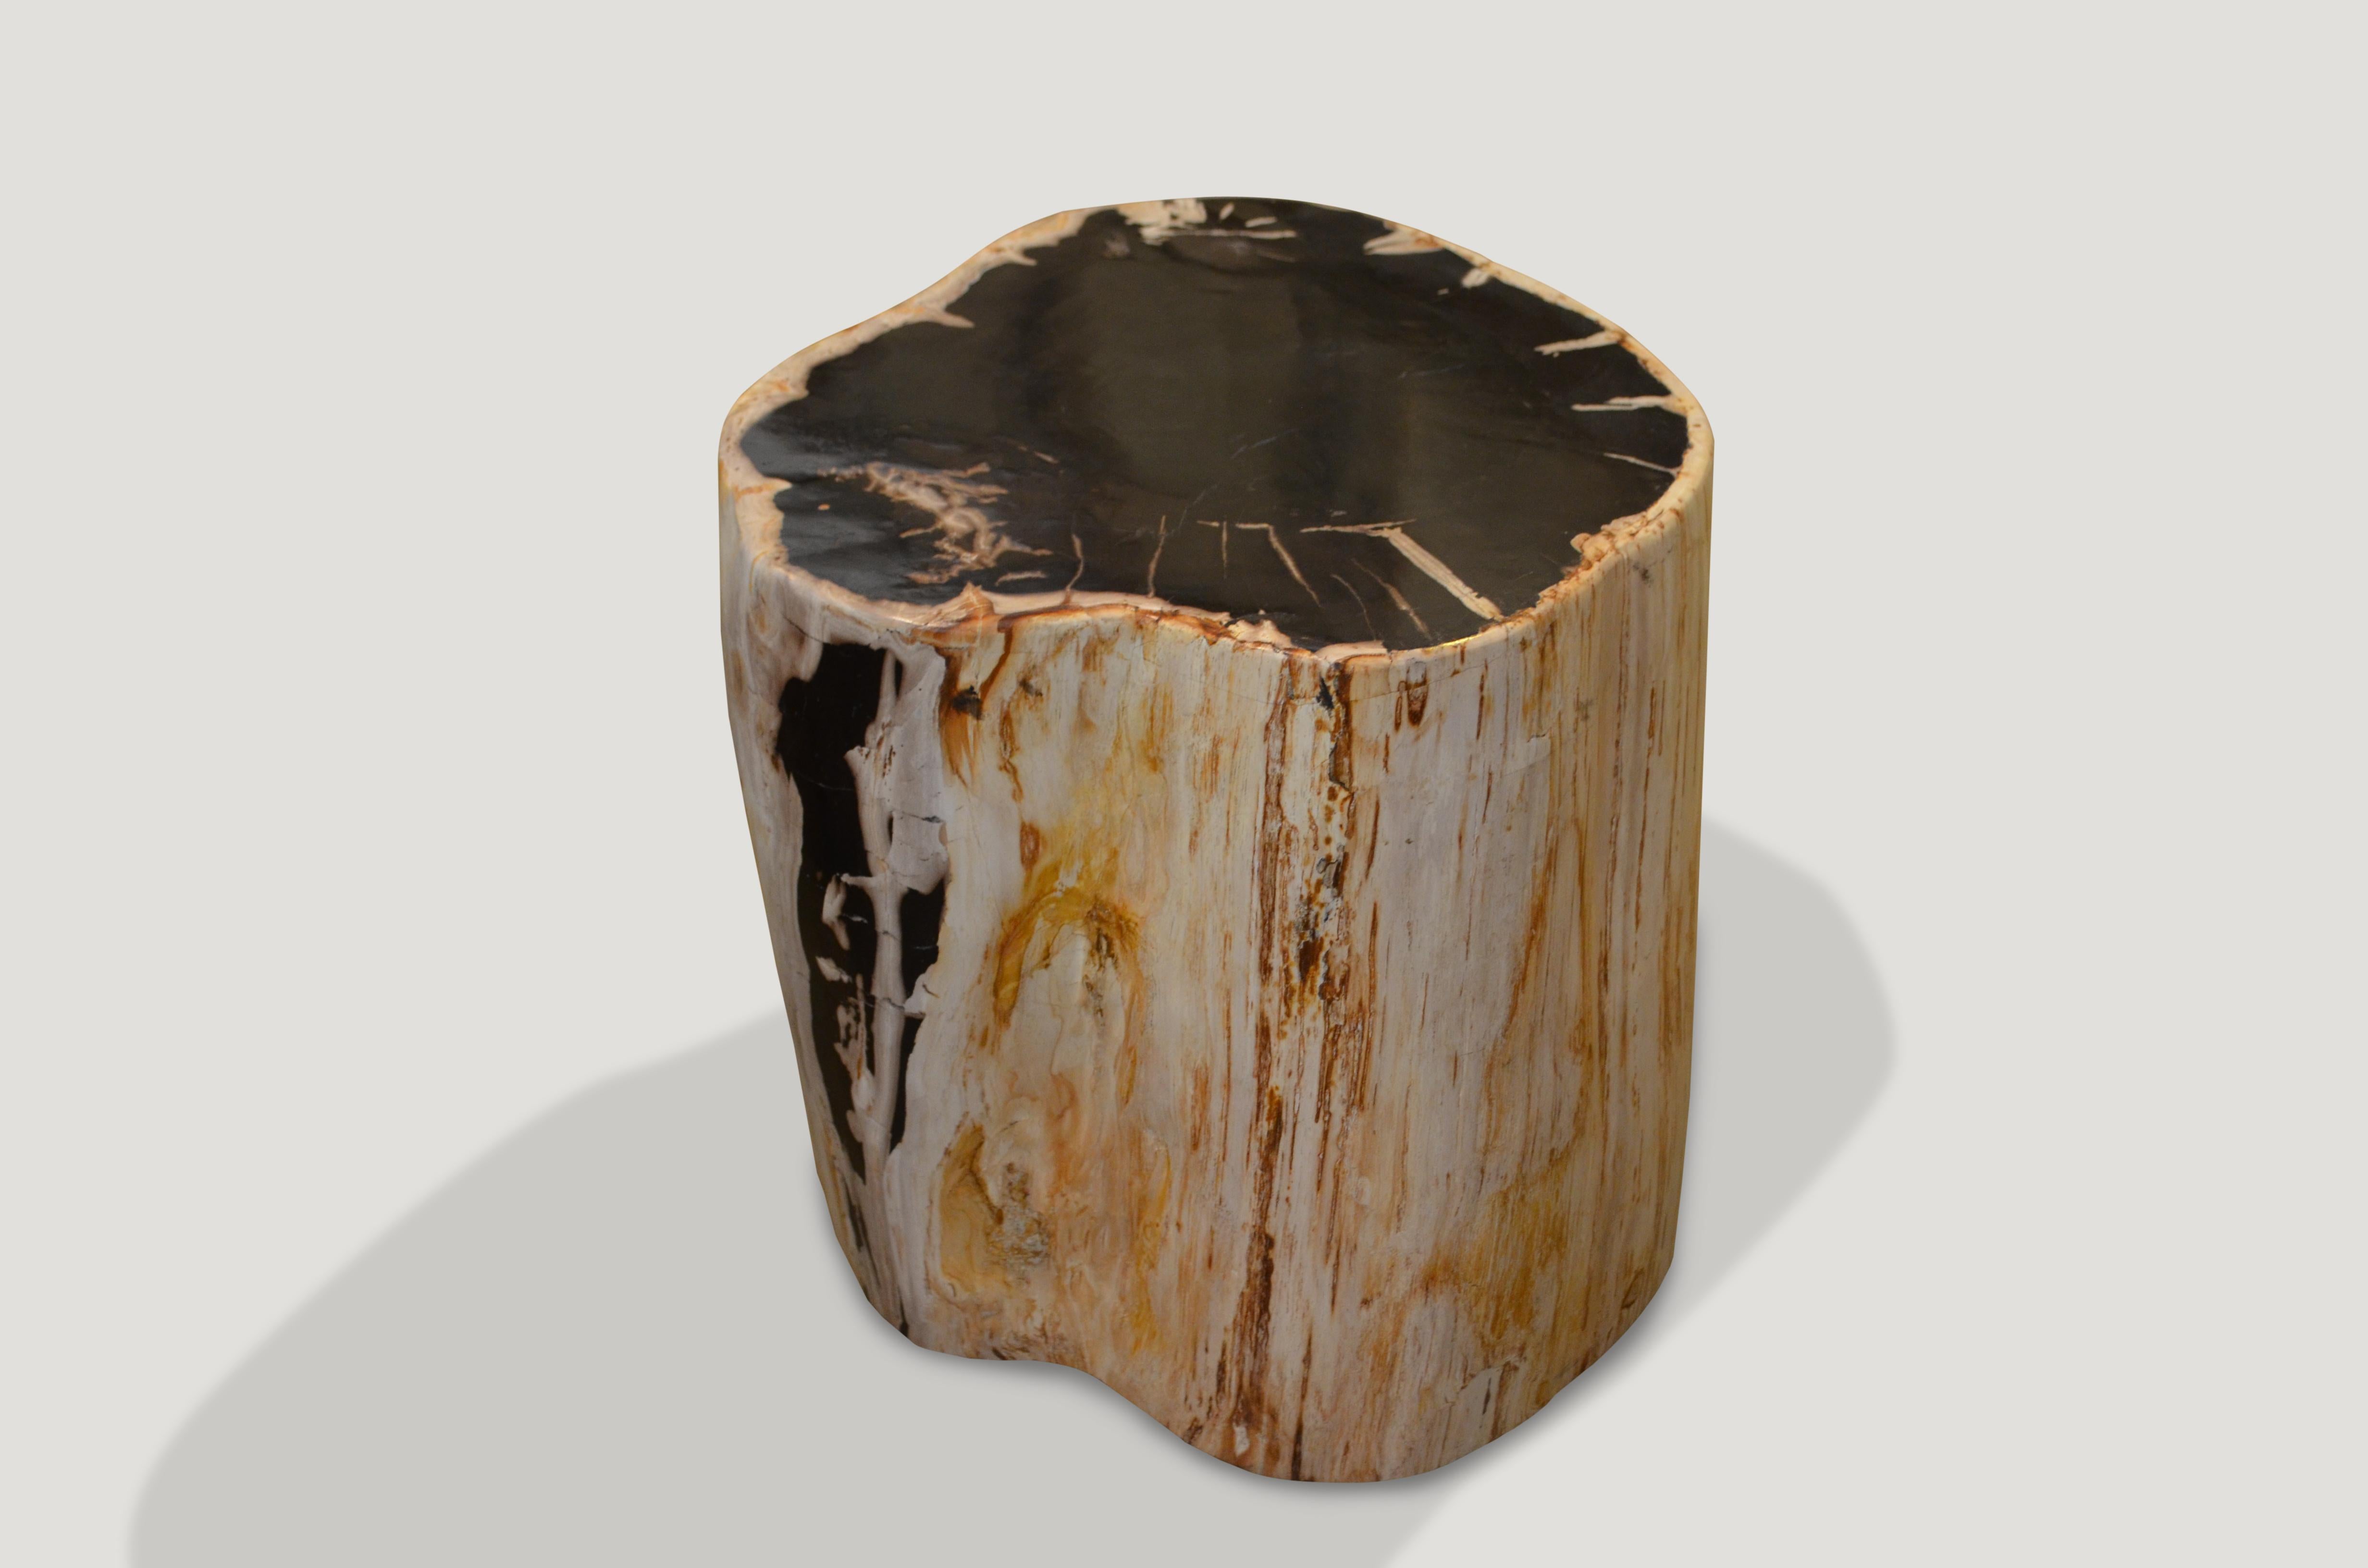 Contrasting color tones on this super smooth petrified wood side table.

We source the highest quality petrified wood available. Each piece is hand-selected and highly polished with minimal cracks. Petrified wood is extremely versatile – even